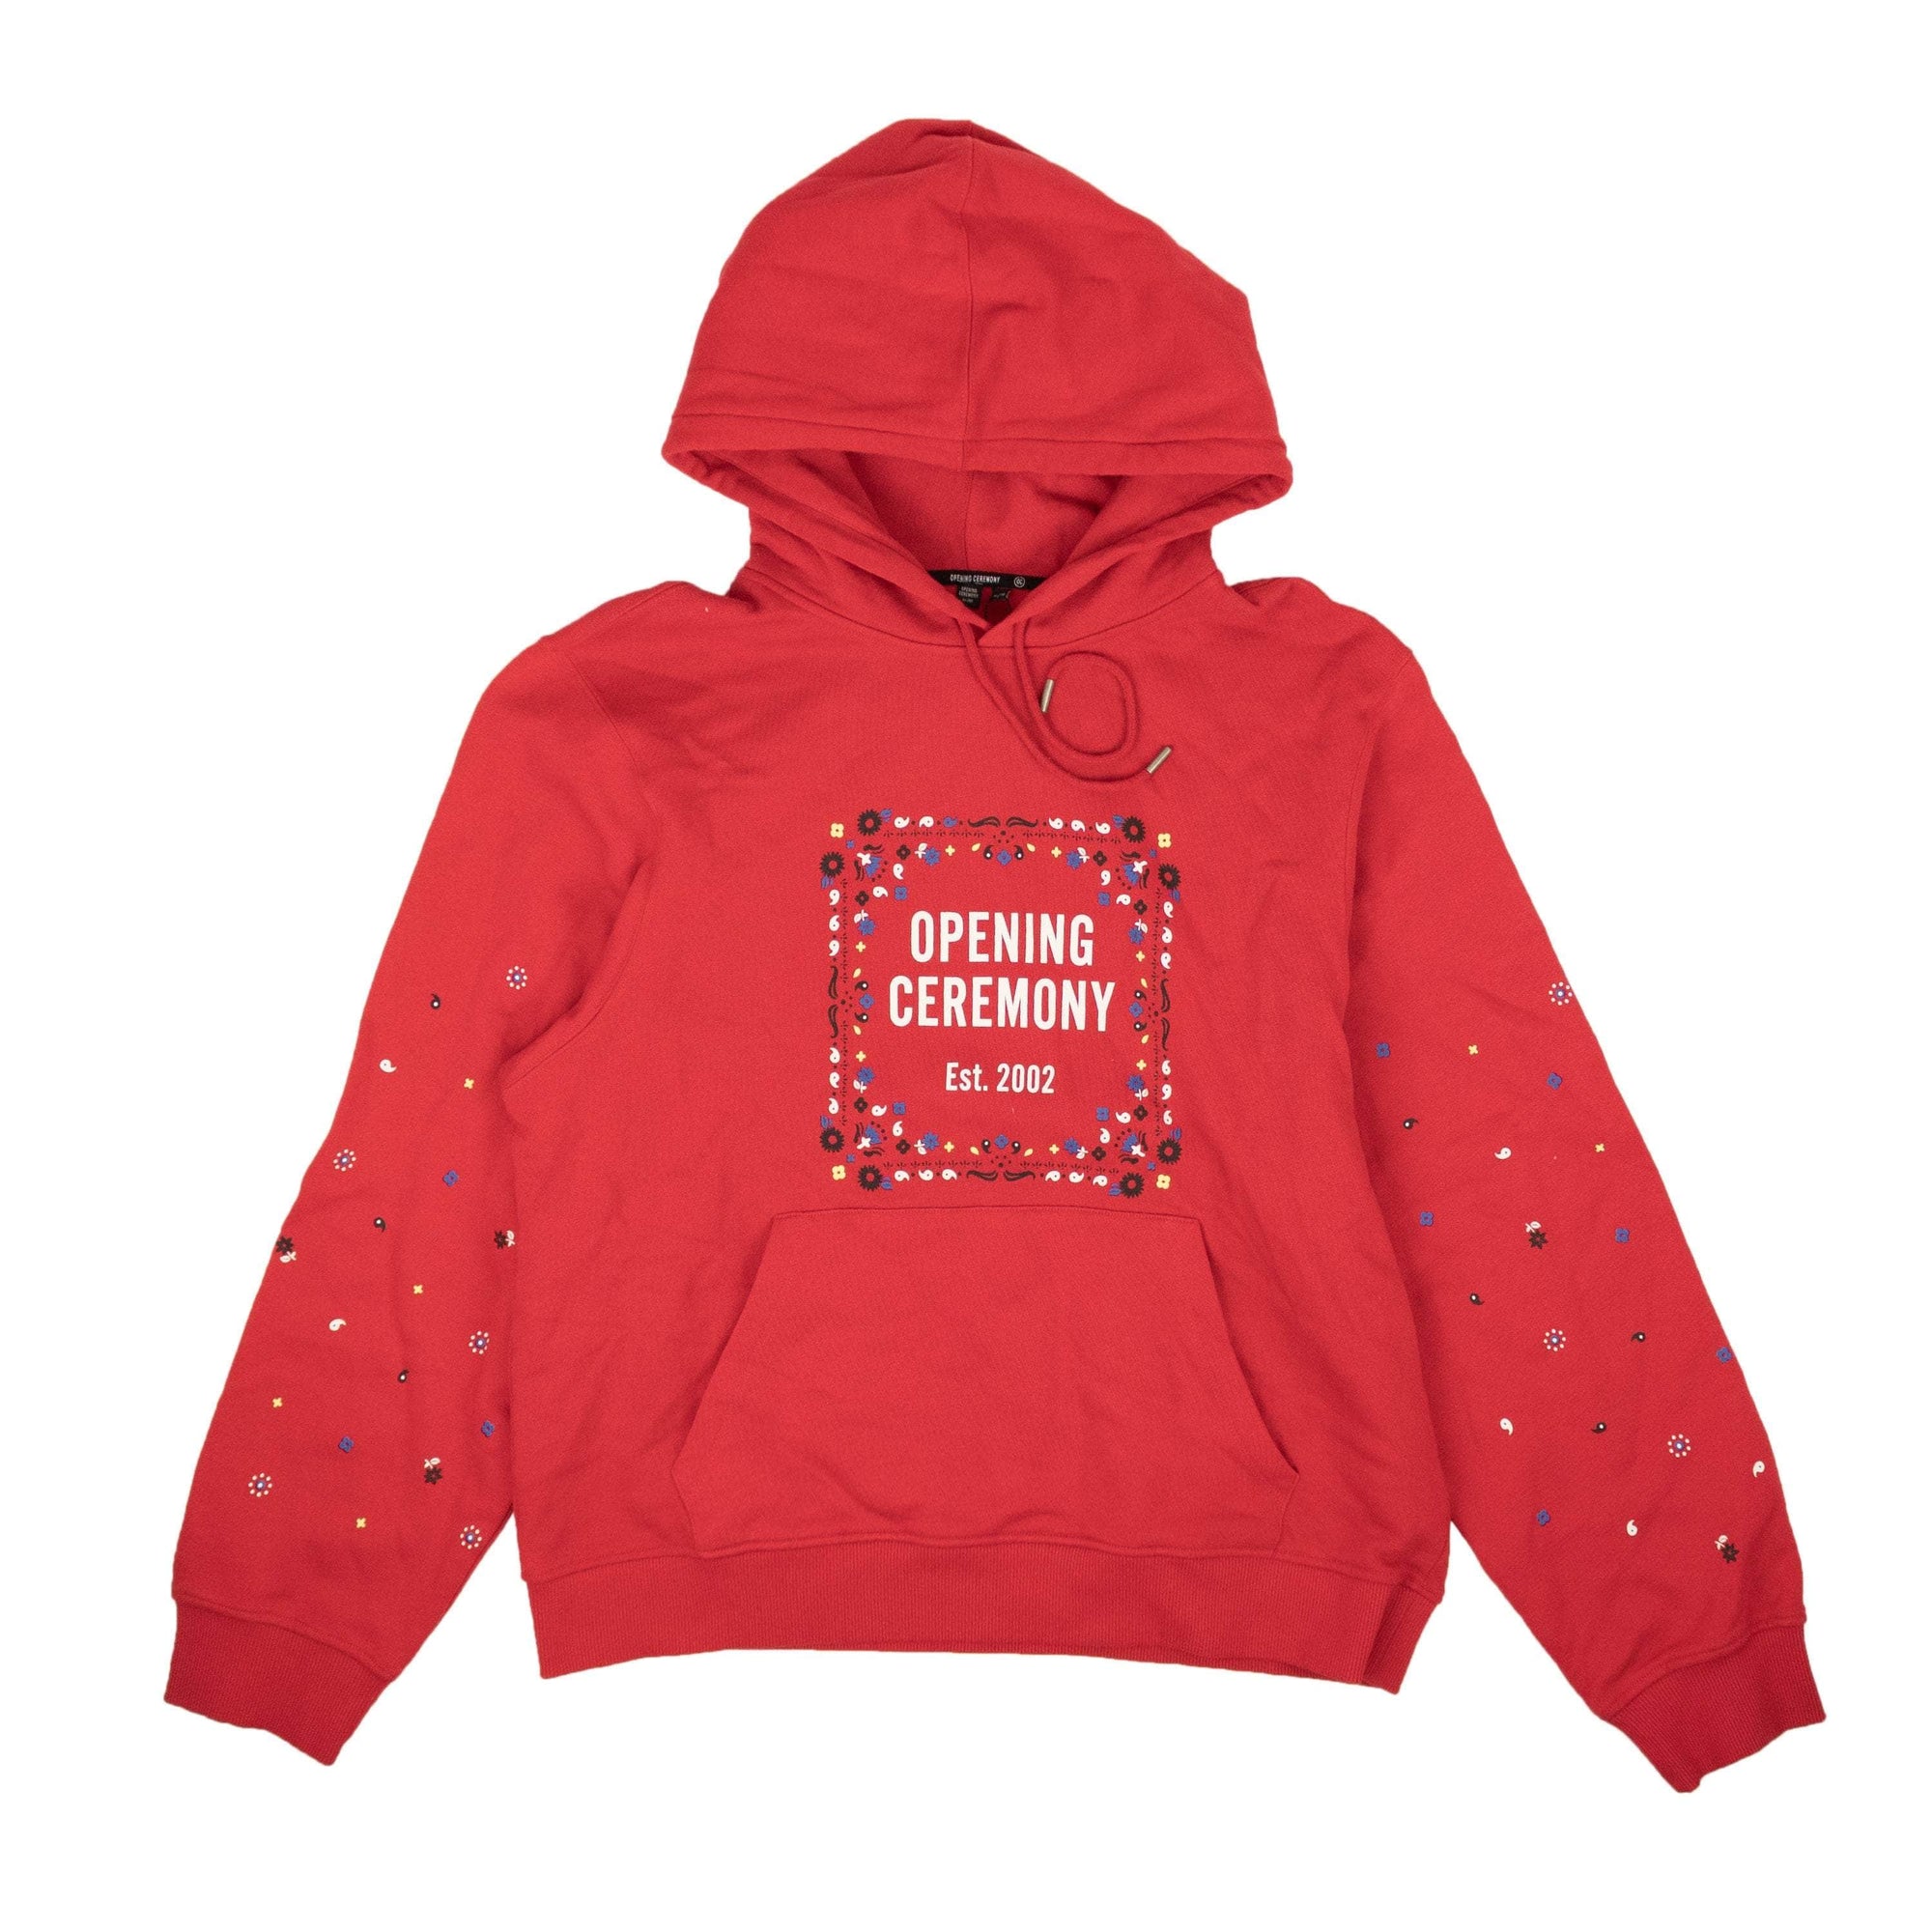 Opening Ceremony channelenable-all, chicmi, couponcollection, gender-mens, gender-womens, main-clothing, shop375 XL Red Cotton Bandana Box Logo Hoodie 95-OCY-1061/XL 95-OCY-1061/XL